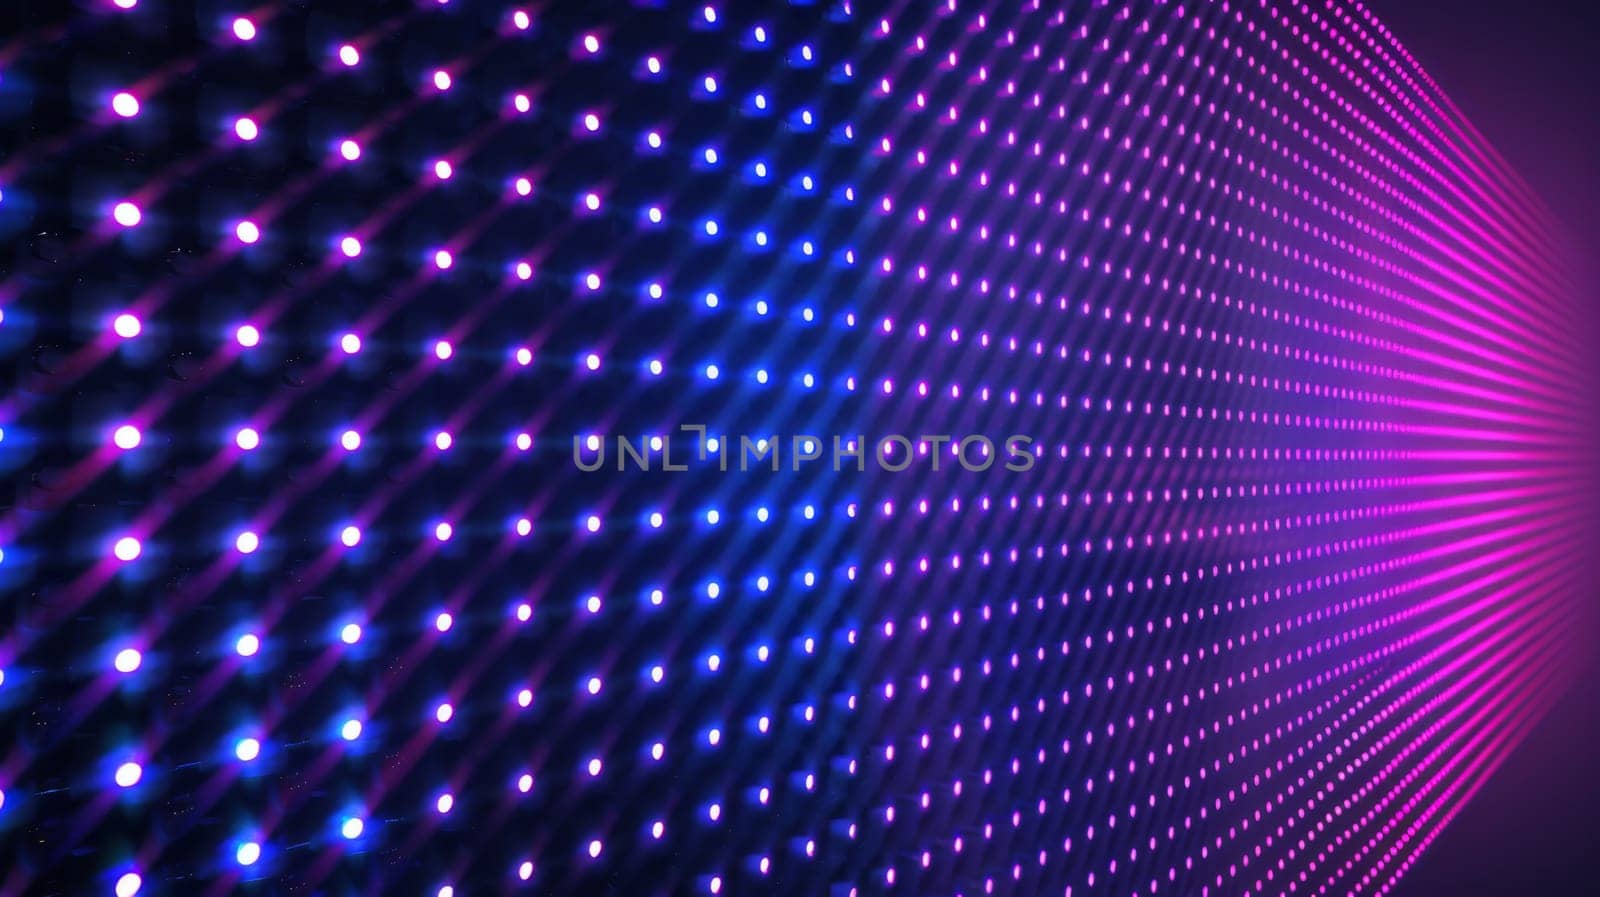 Blue and purple dot lights on a black background adorn the LED concave wall video screen. Modern illustration of a grid pattern for an LED display in a stadium or on a scene.